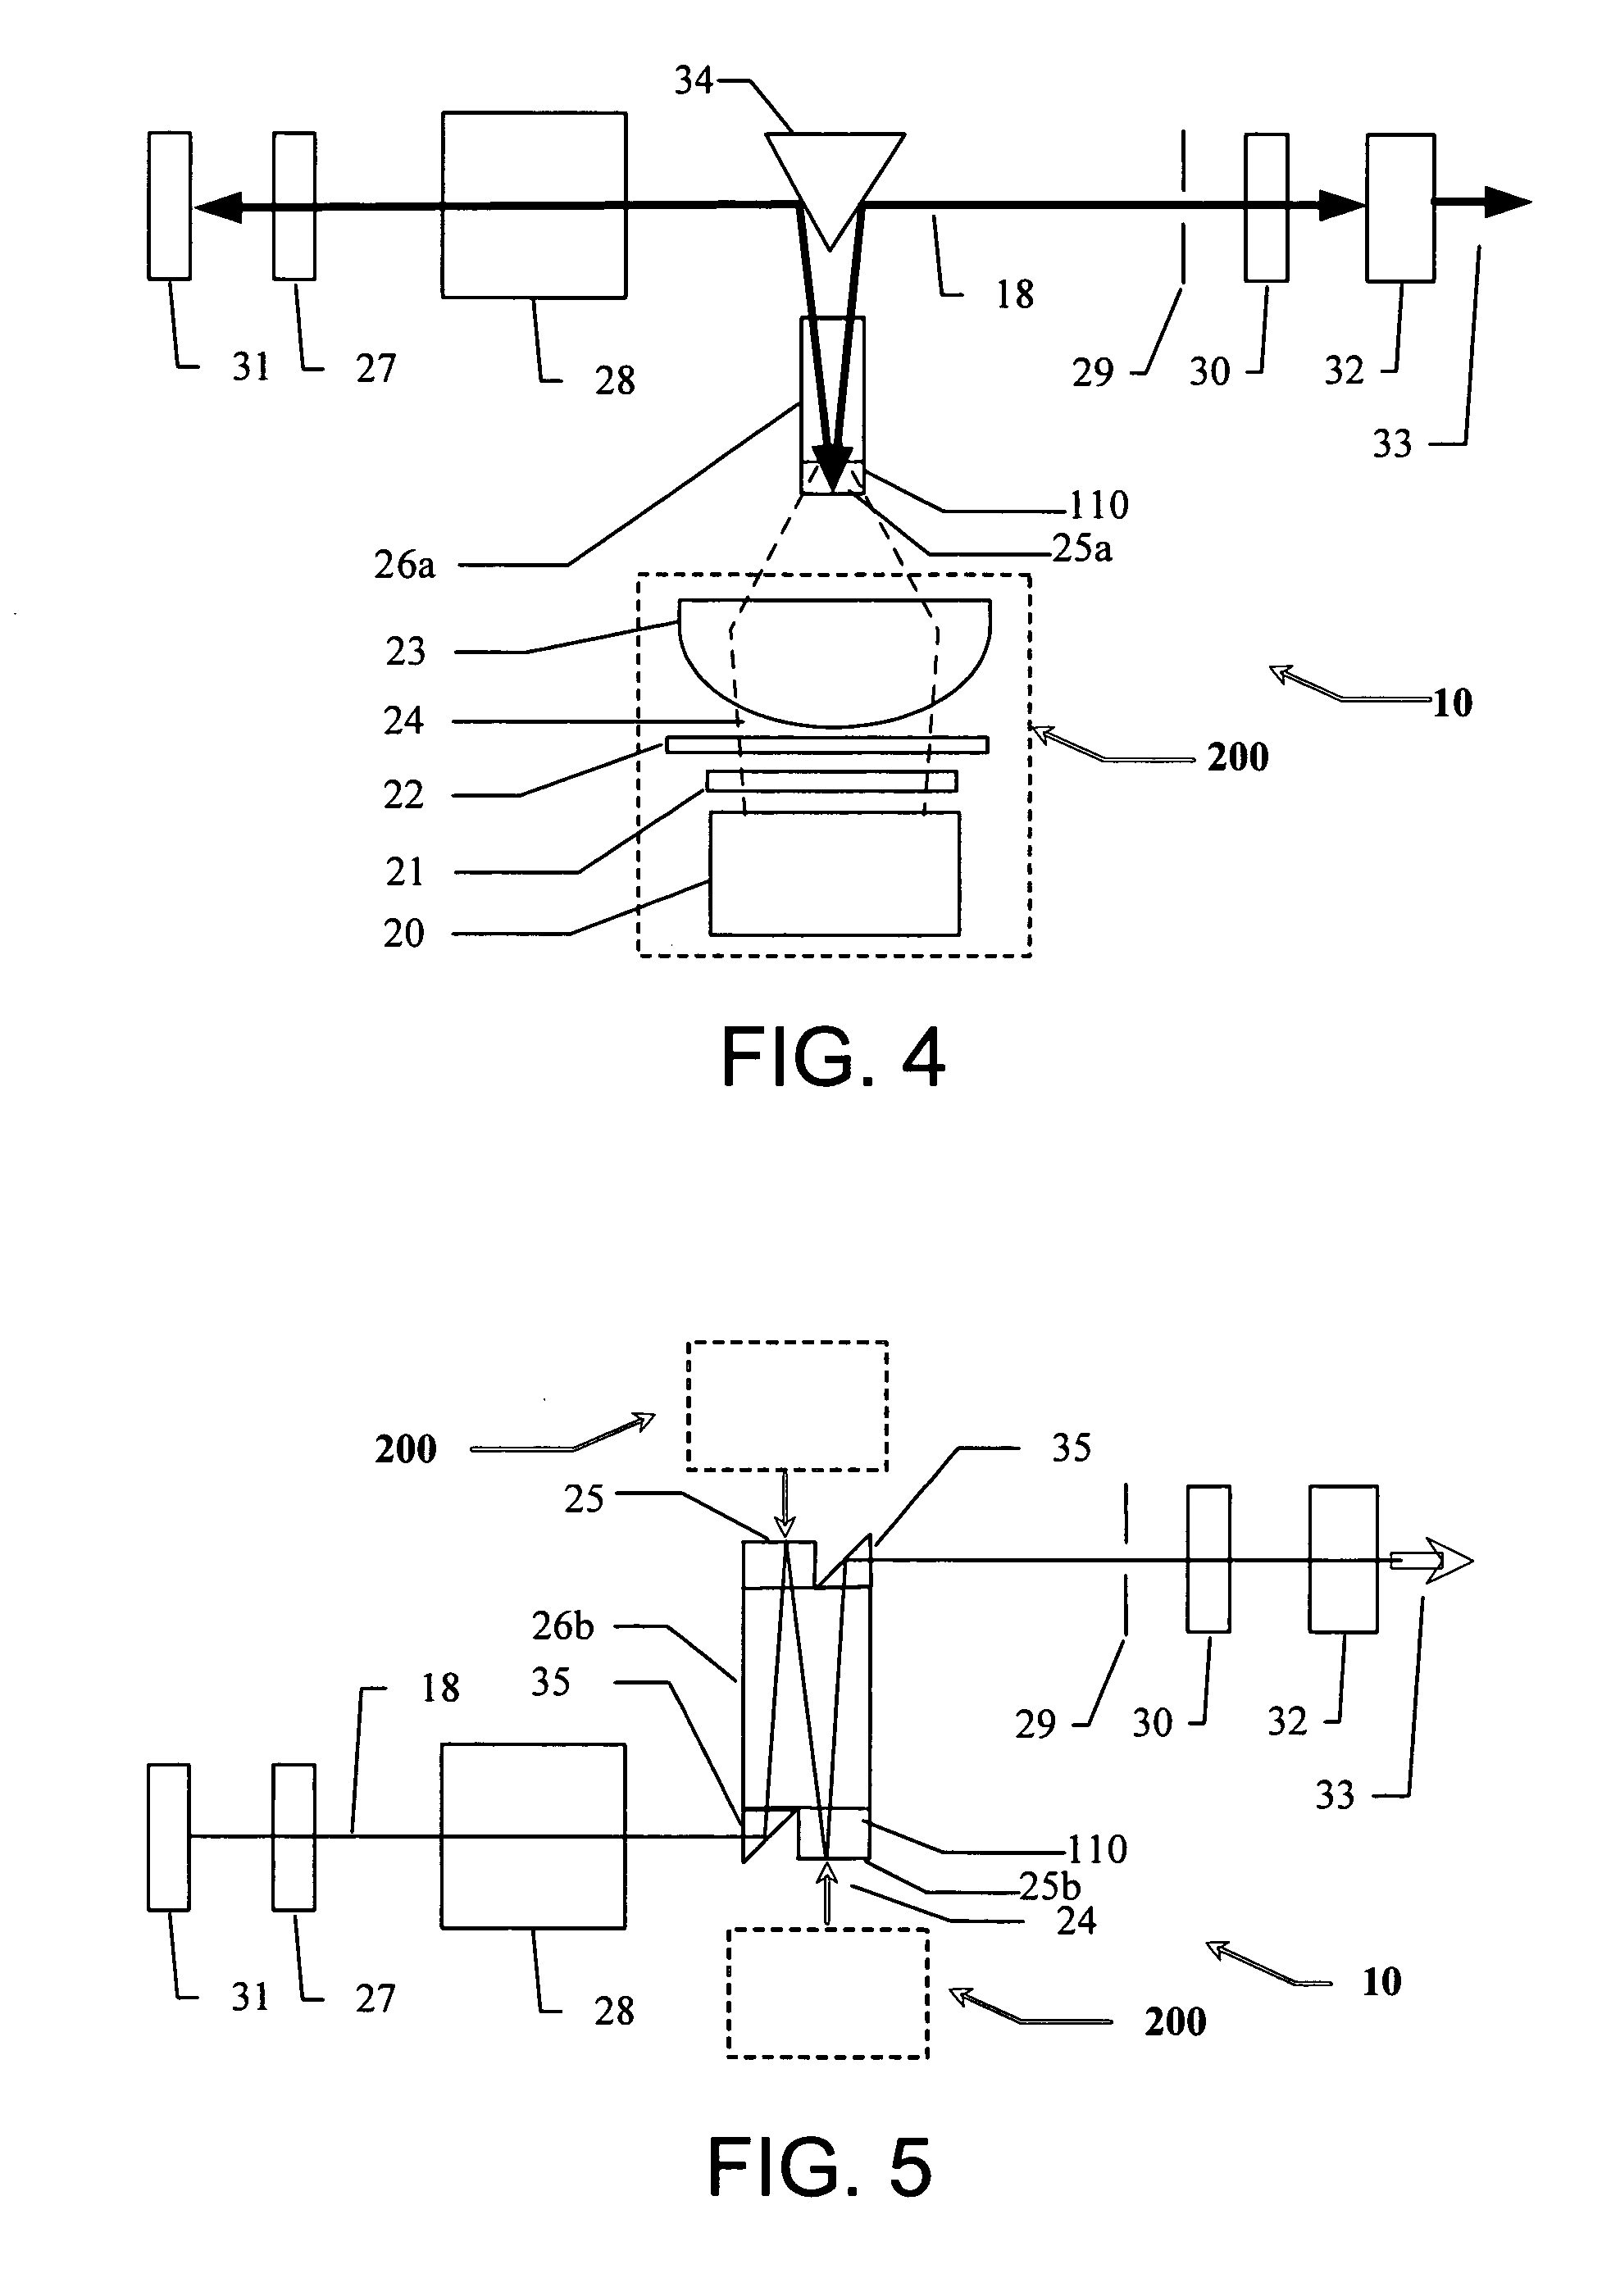 Longitudinally pumped solid state laser and methods of making and using